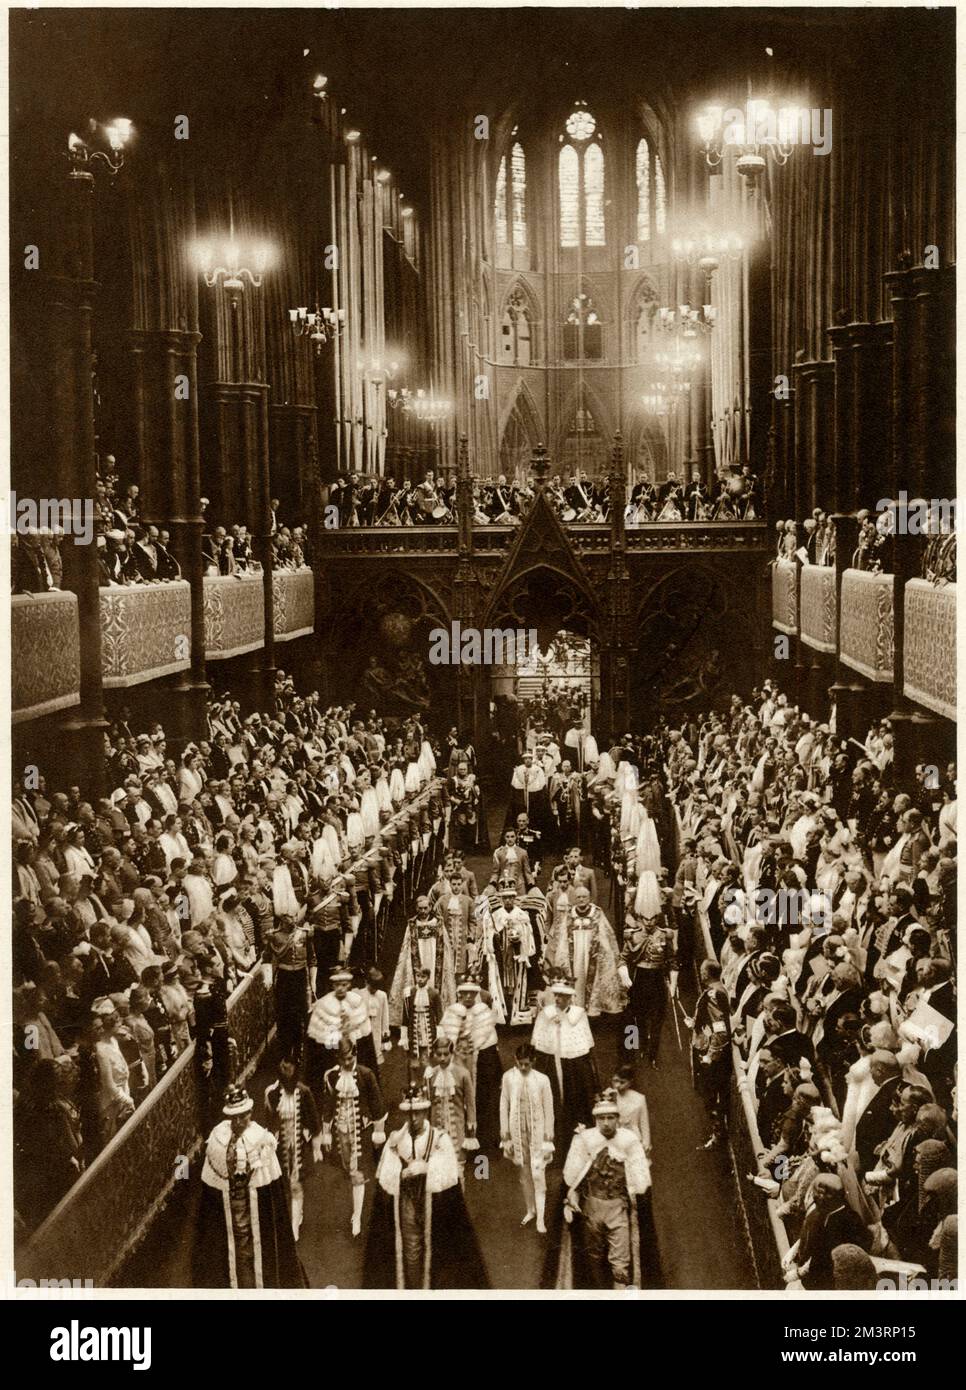 King George VI leaves Westminister Abbey after being crowned. The King's procession is passing through th Choir to the West Door. In the foreground are the Lord High Constable of England (Lord Crewe), Lord Zetland, carrying the Sword of State, and the Earl Marshal (the Duke of Norfolk), followed by their pages. The King is accompanied by the Bishop of Durham and of the Bath and Wells, escorted by the Lieutenant with ten Gentlemen Arms and Standard Bearer.     Date: 12 May 1937 Stock Photo